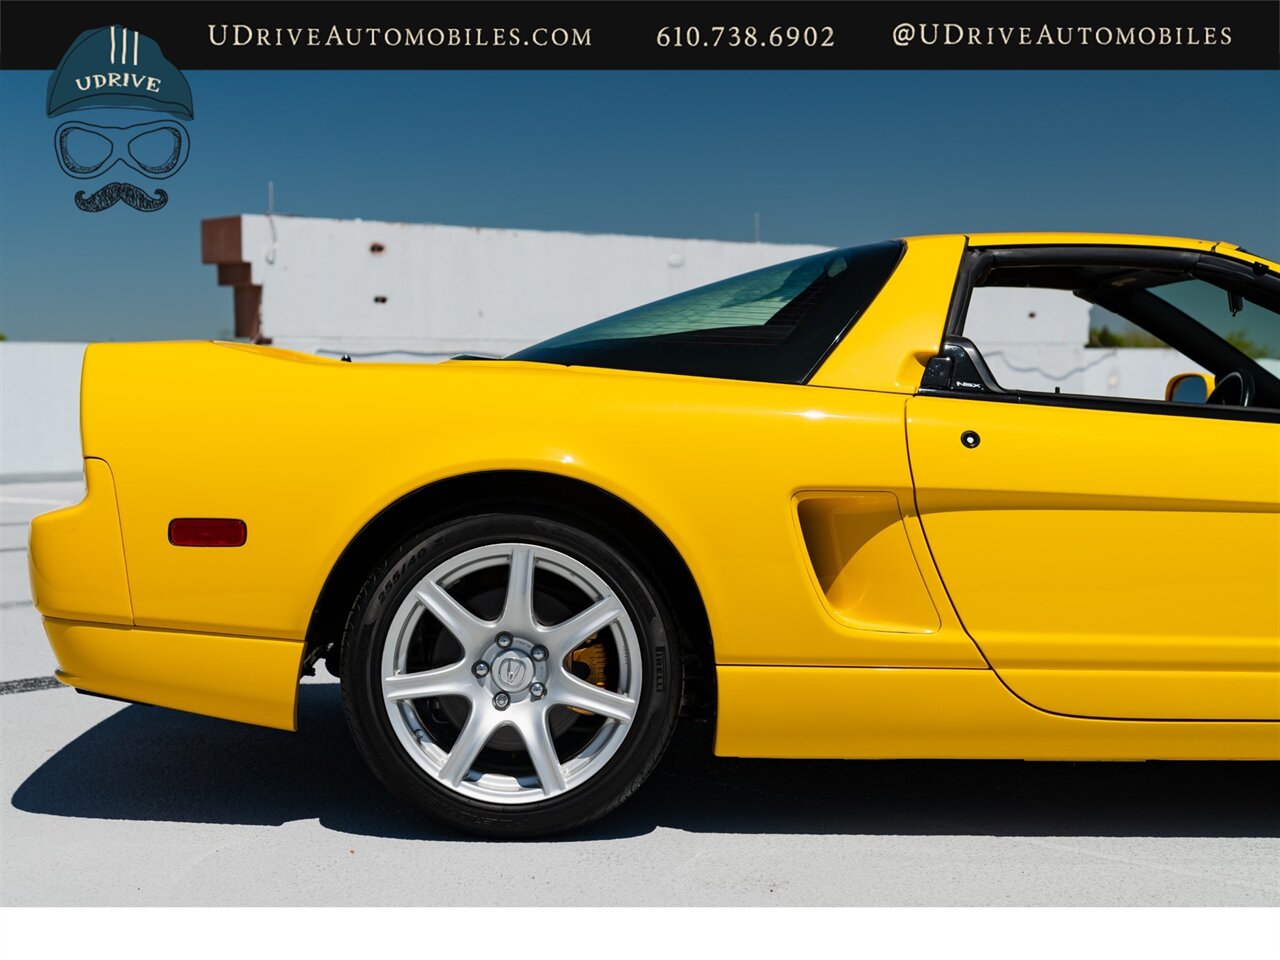 2003 Acura NSX NSX-T  Spa Yellow over Yellow Lthr 1 of 13 Produced - Photo 18 - West Chester, PA 19382